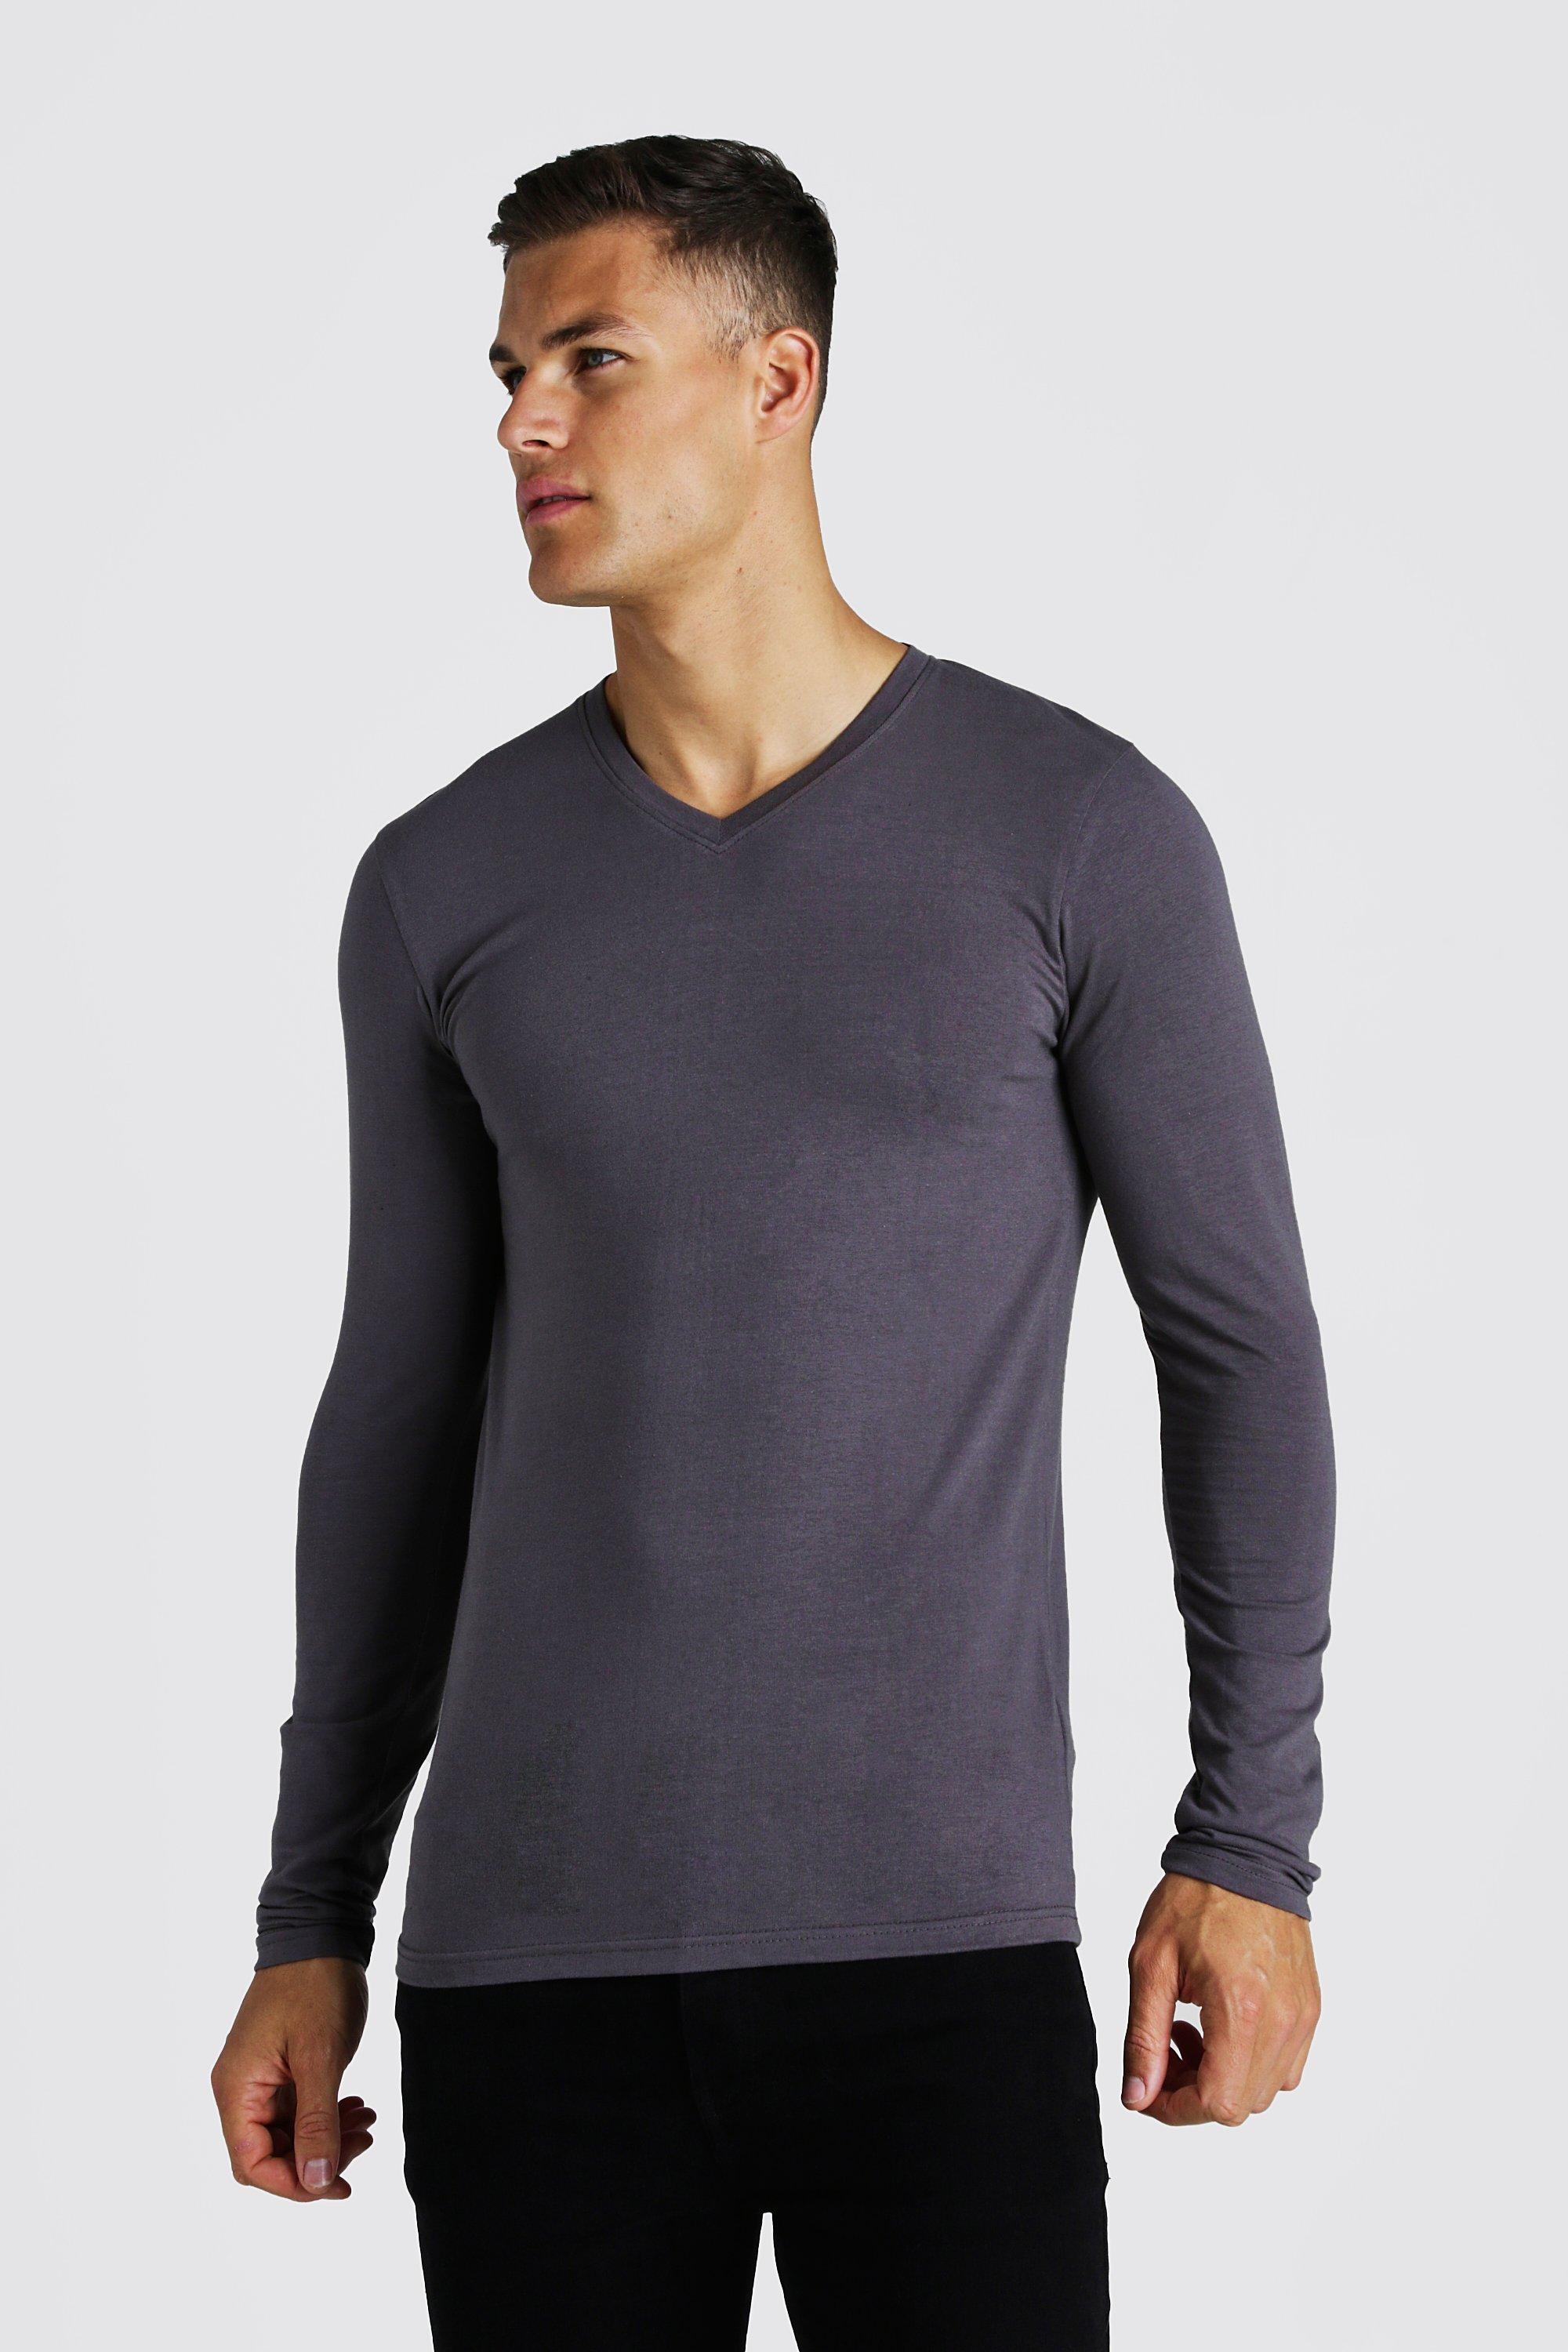 Muscle Fit Long Sleeve V Neck T-Shirt - boohooMAN